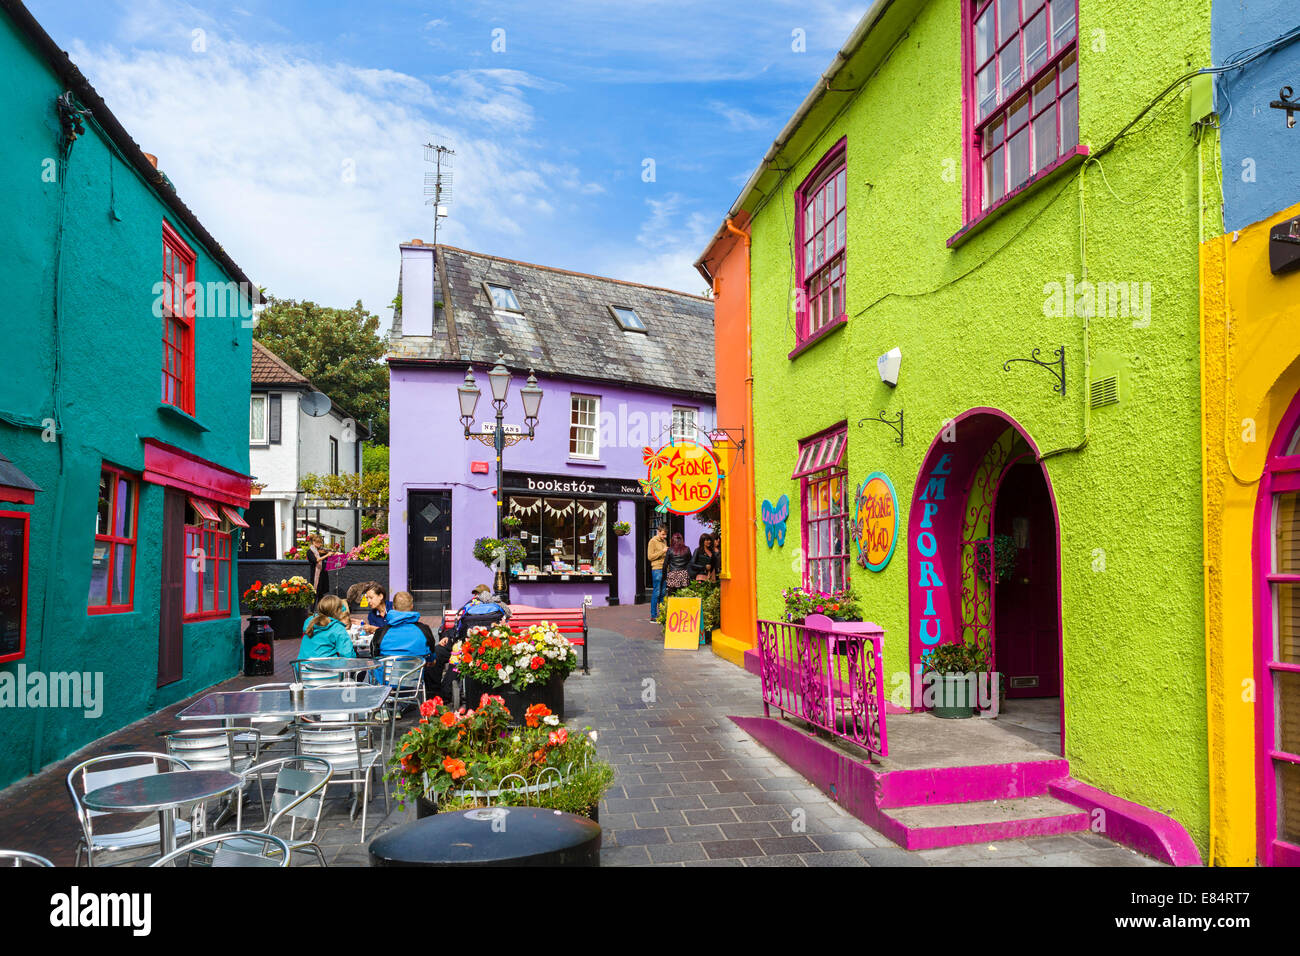 Cafe and shops in Newman's Mall in the town centre, Kinsale, County Cork, Republic of Ireland Stock Photo